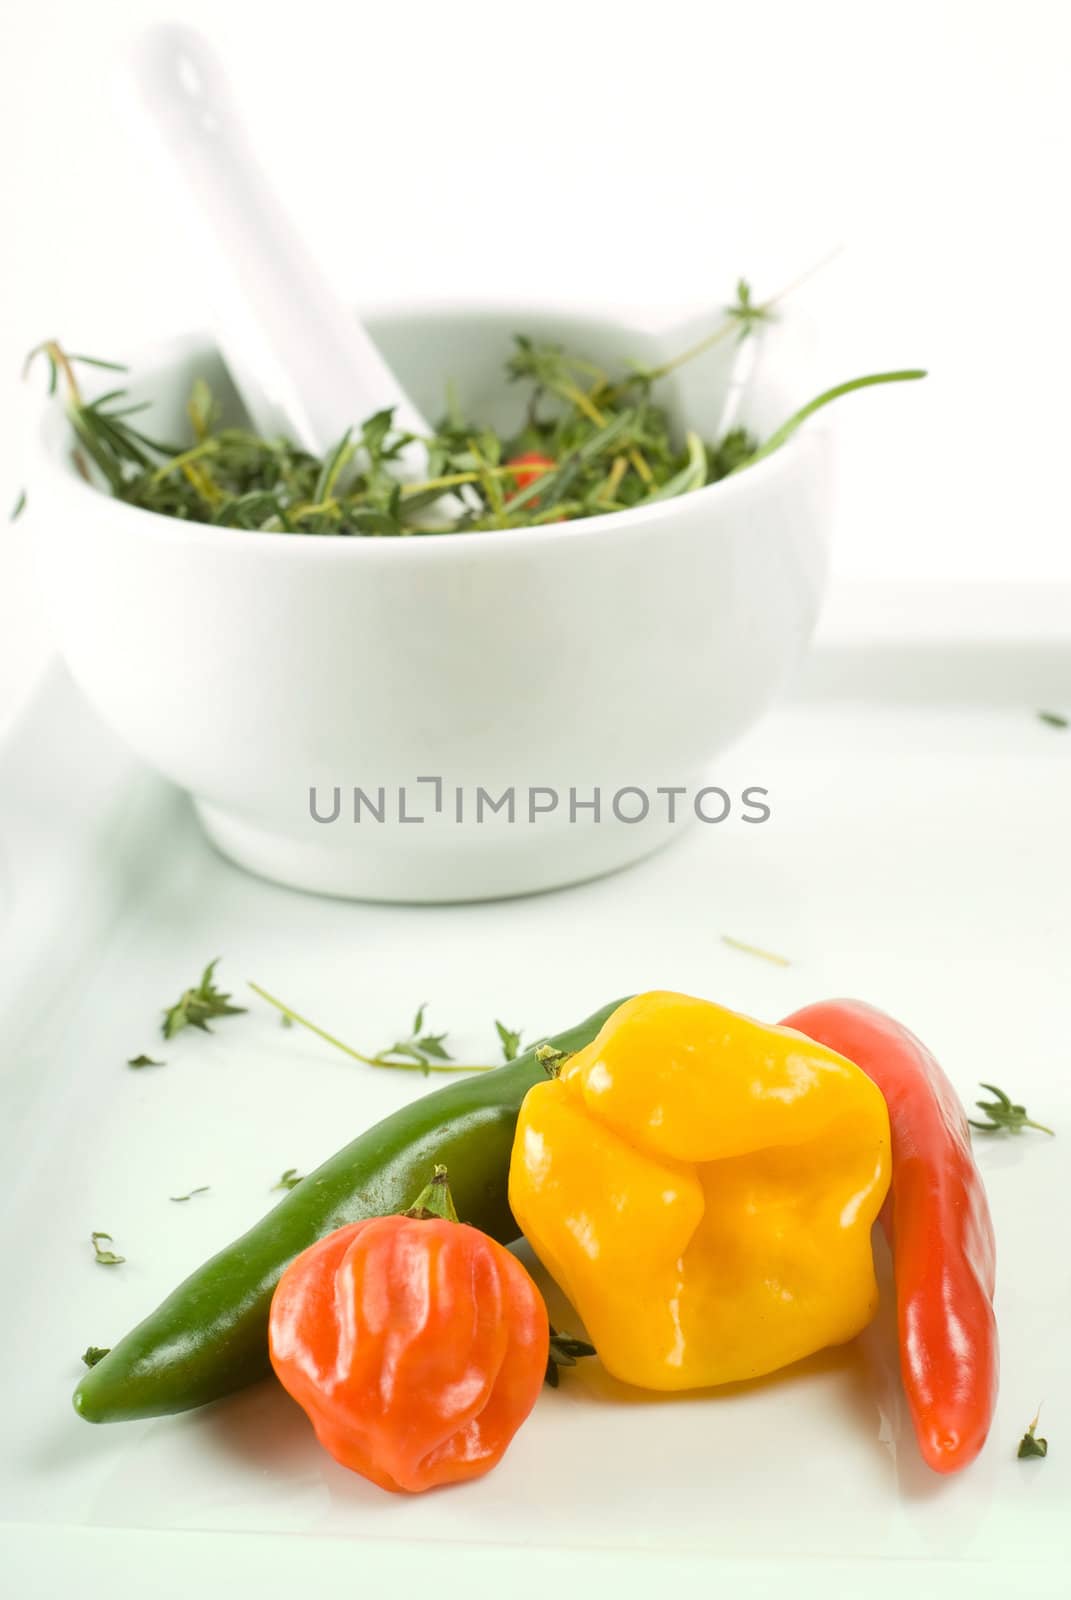 Mortar, pestle, herbs and peppers by alistaircotton